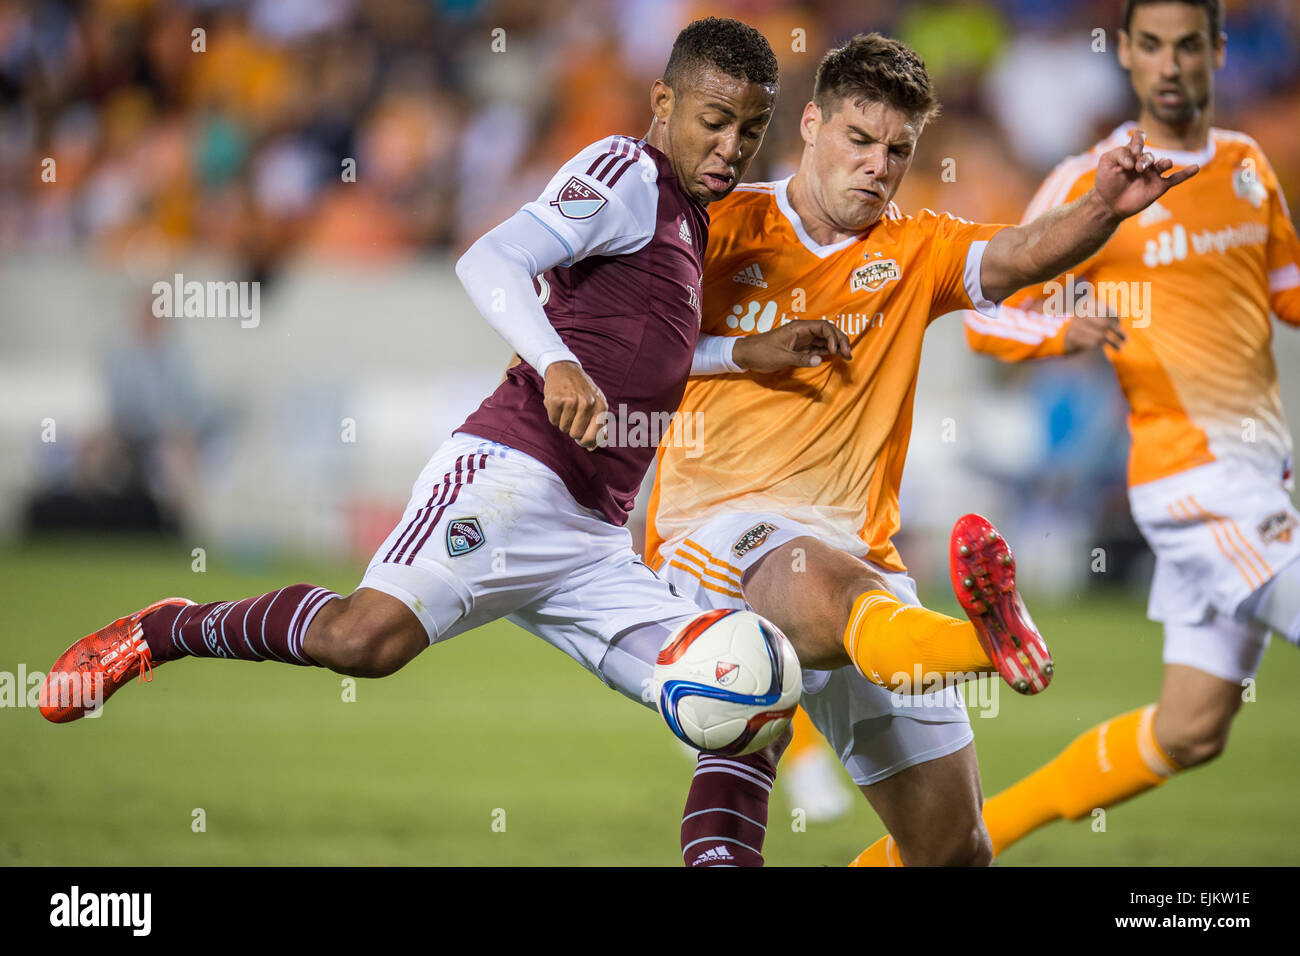 Houston, Texas, USA. 28th Mar, 2015. Colorado Rapids forward Gabriel Torres (10) attempts to score as Houston Dynamo defender David Horst (18) blocks the shot during an MLS game between the Houston Dynamo and the Colorado Rapids at BBVA Compass Stadium in Houston, TX on March 28th, 2015. The game ended in a 0-0 draw. Credit:  Trask Smith/ZUMA Wire/Alamy Live News Stock Photo